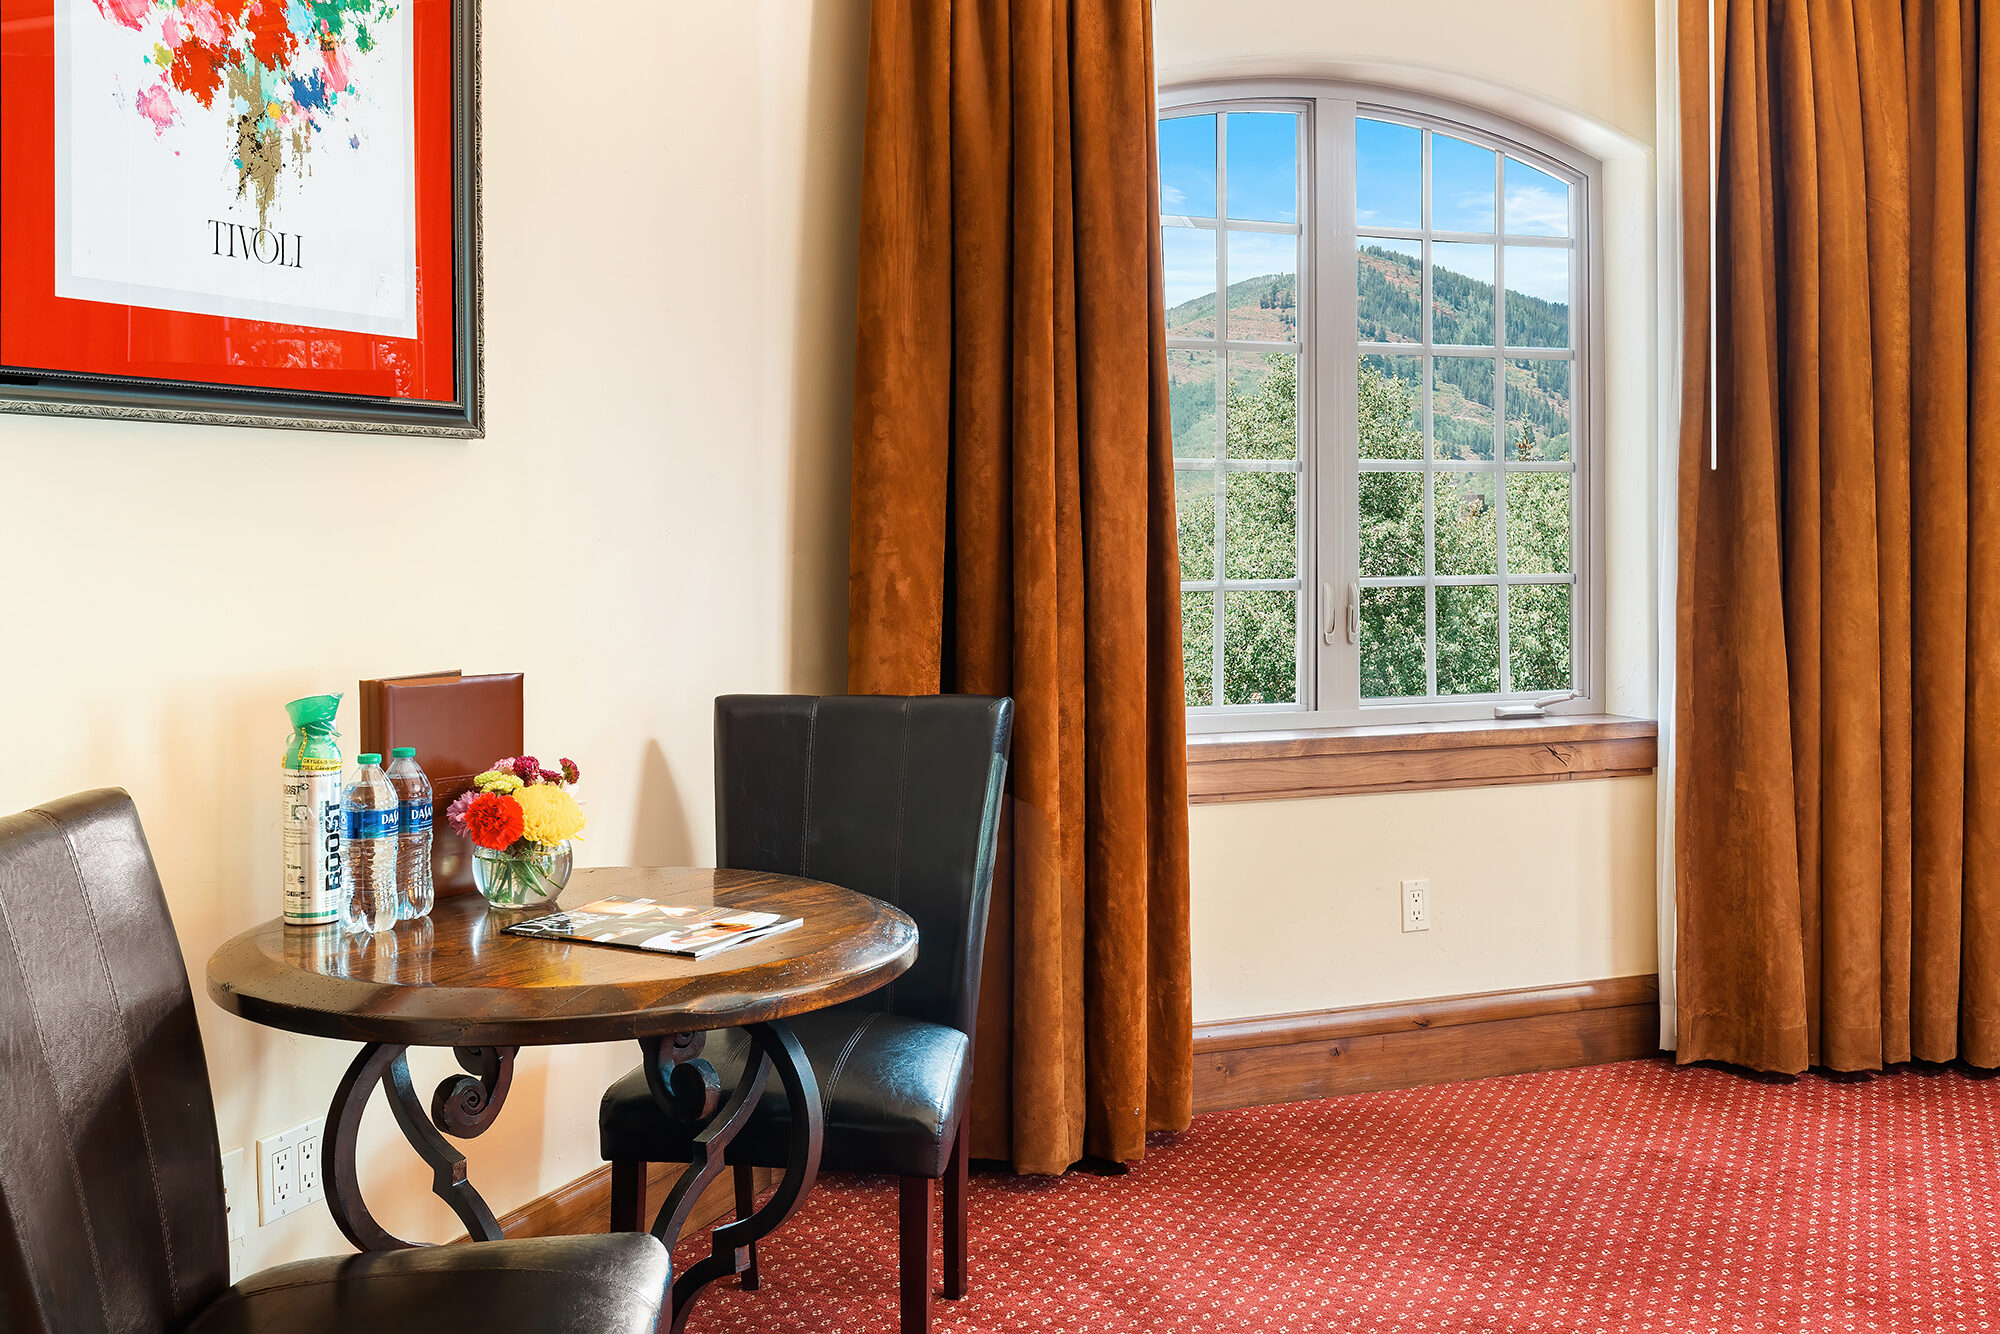 Tower village guest room has sitting area and amenities Tivoli Lodge Vail Colorado